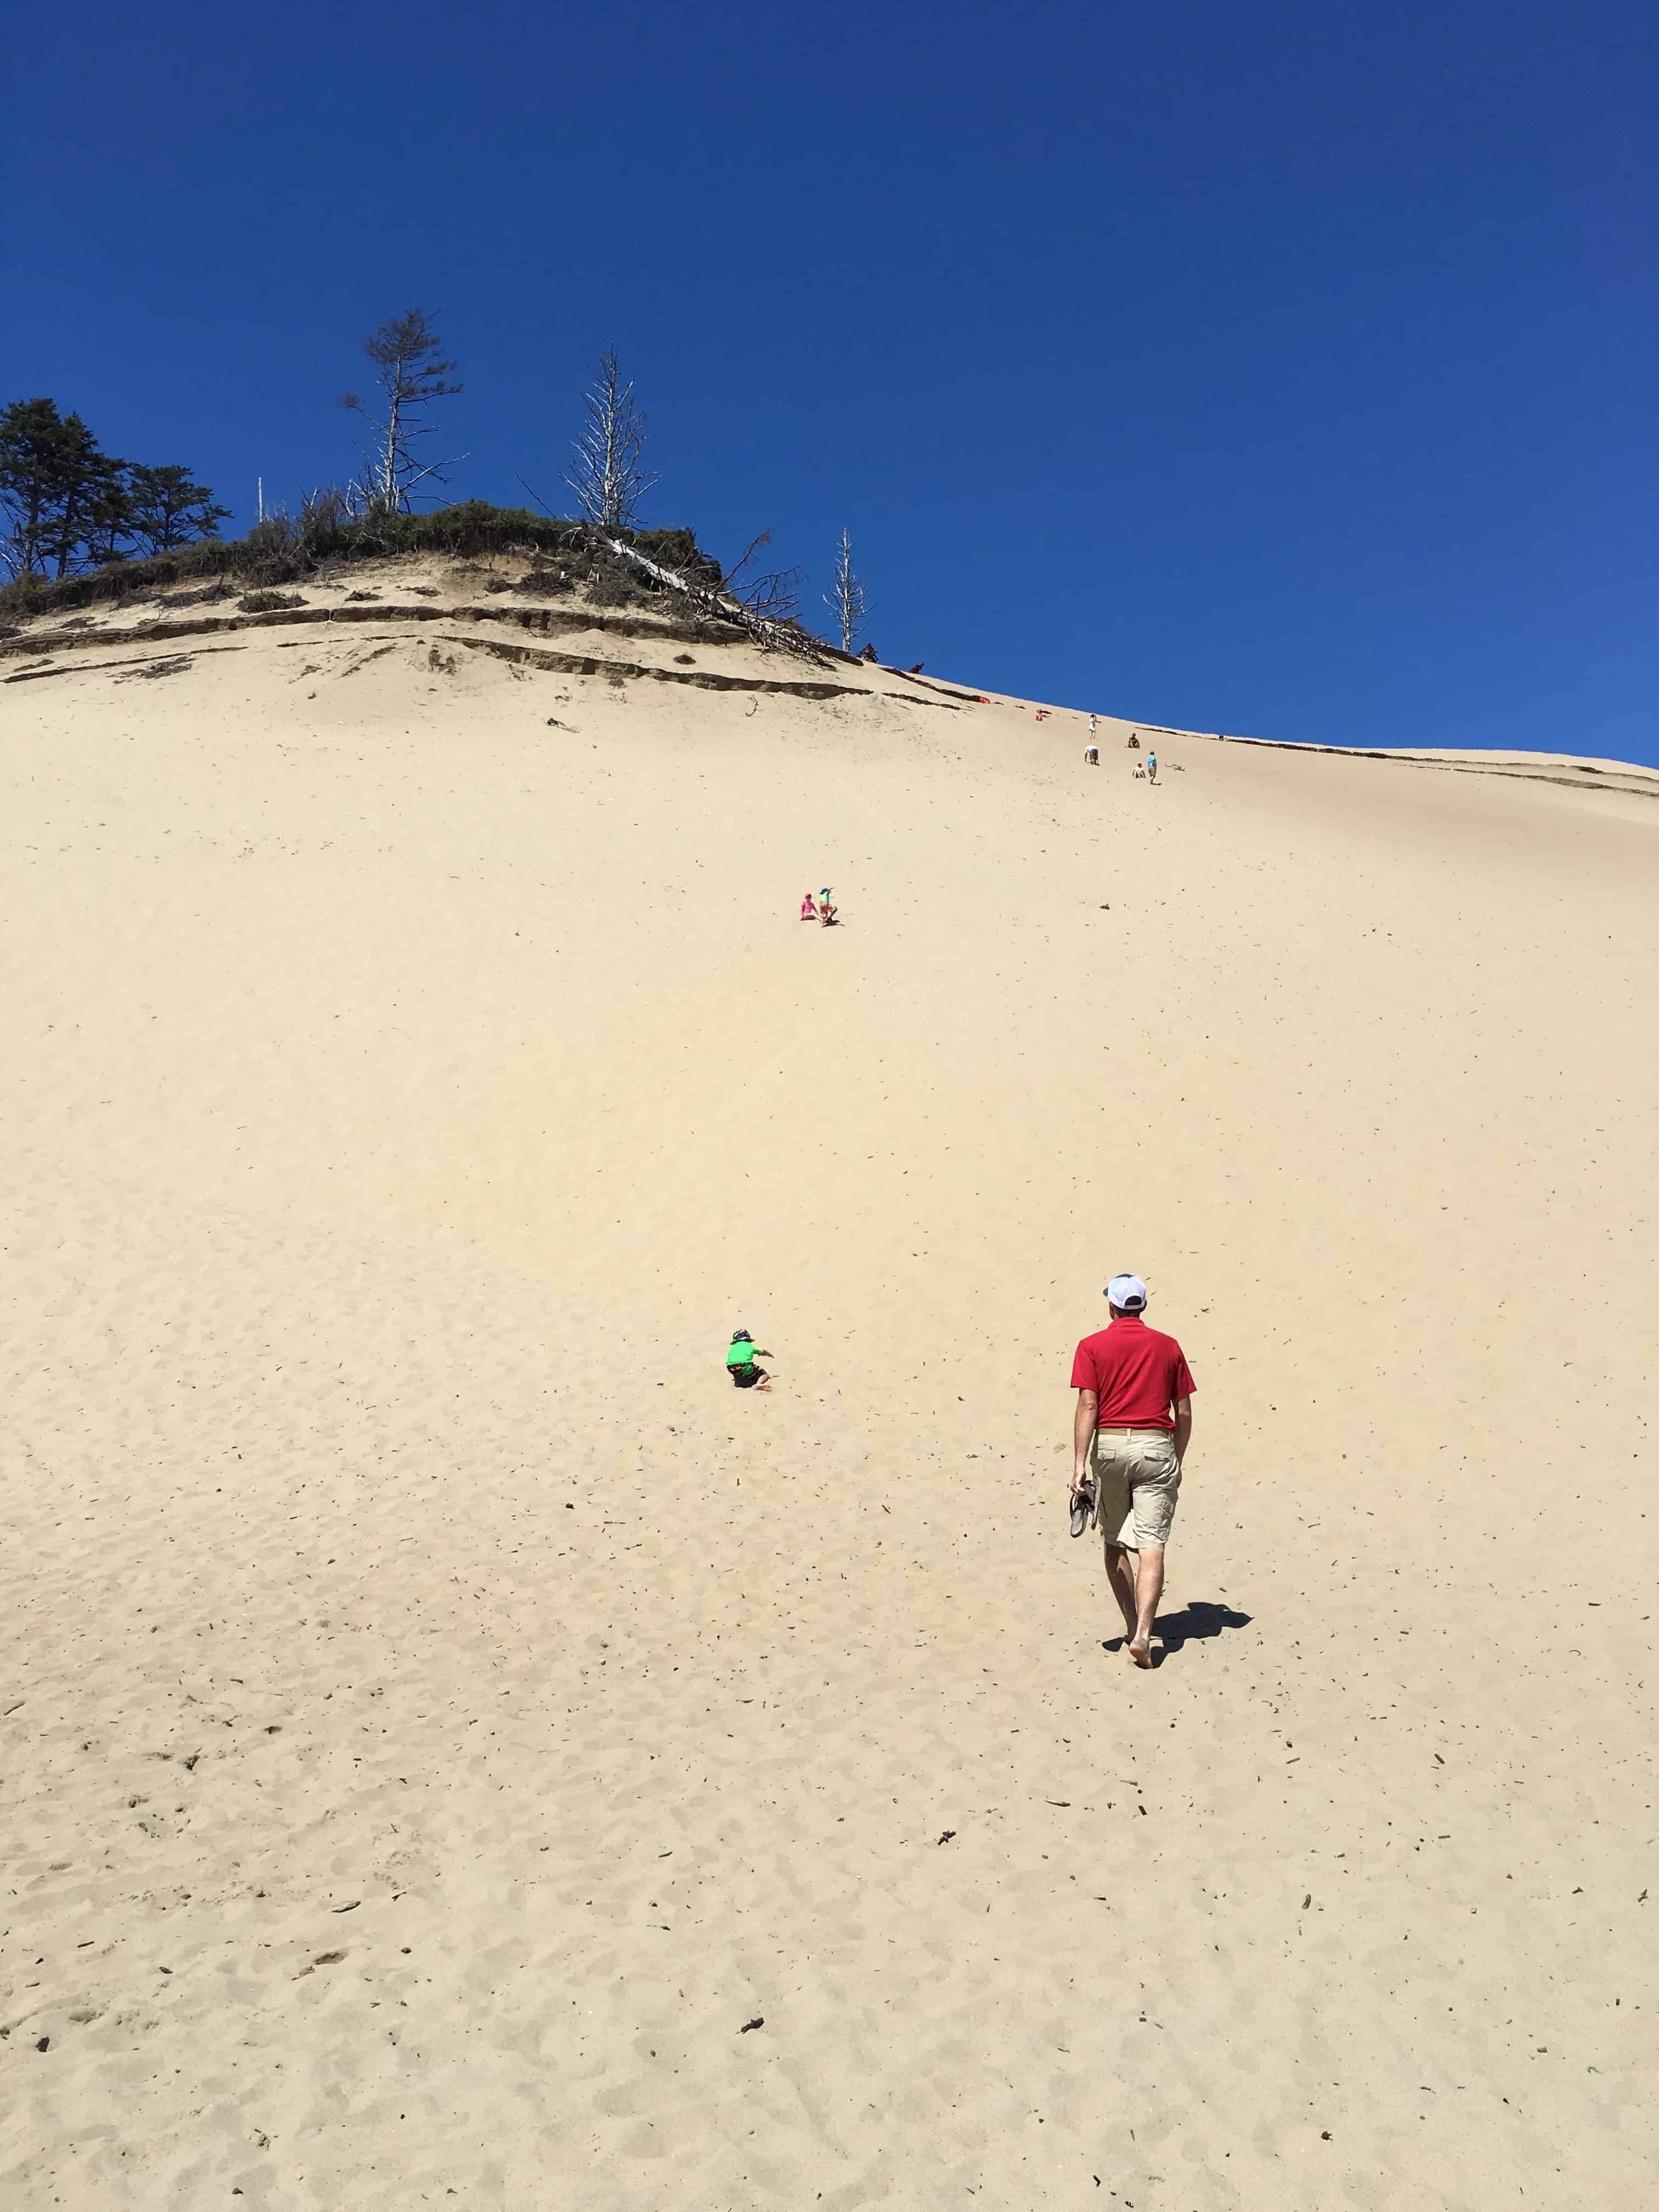 man in red shirt at bottom of sand dune